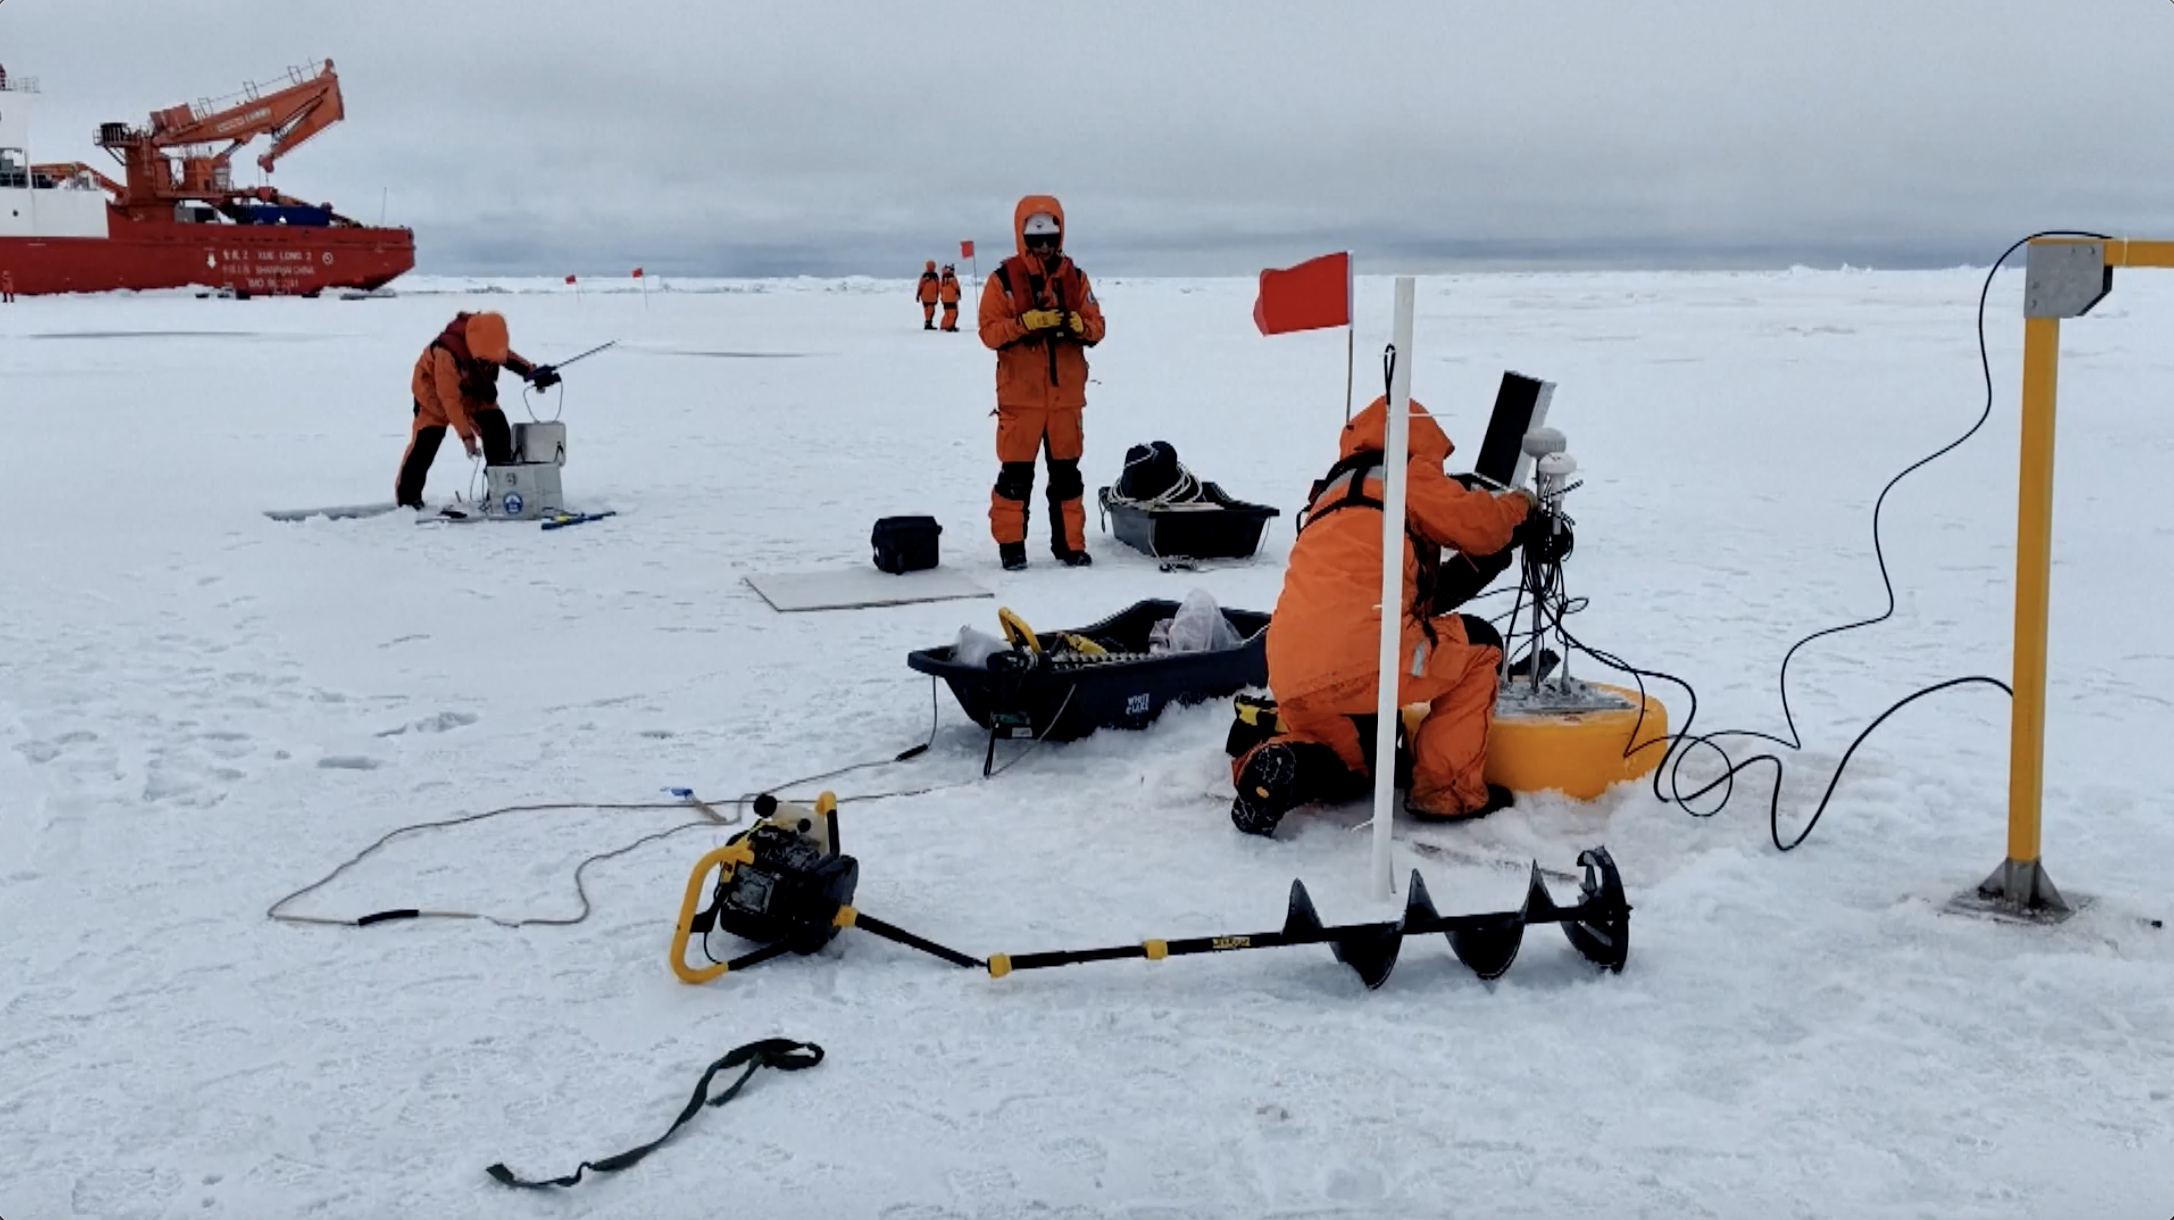 Scientists install equipment and collect samples in the Arctic region. /China Media Group (CMG)